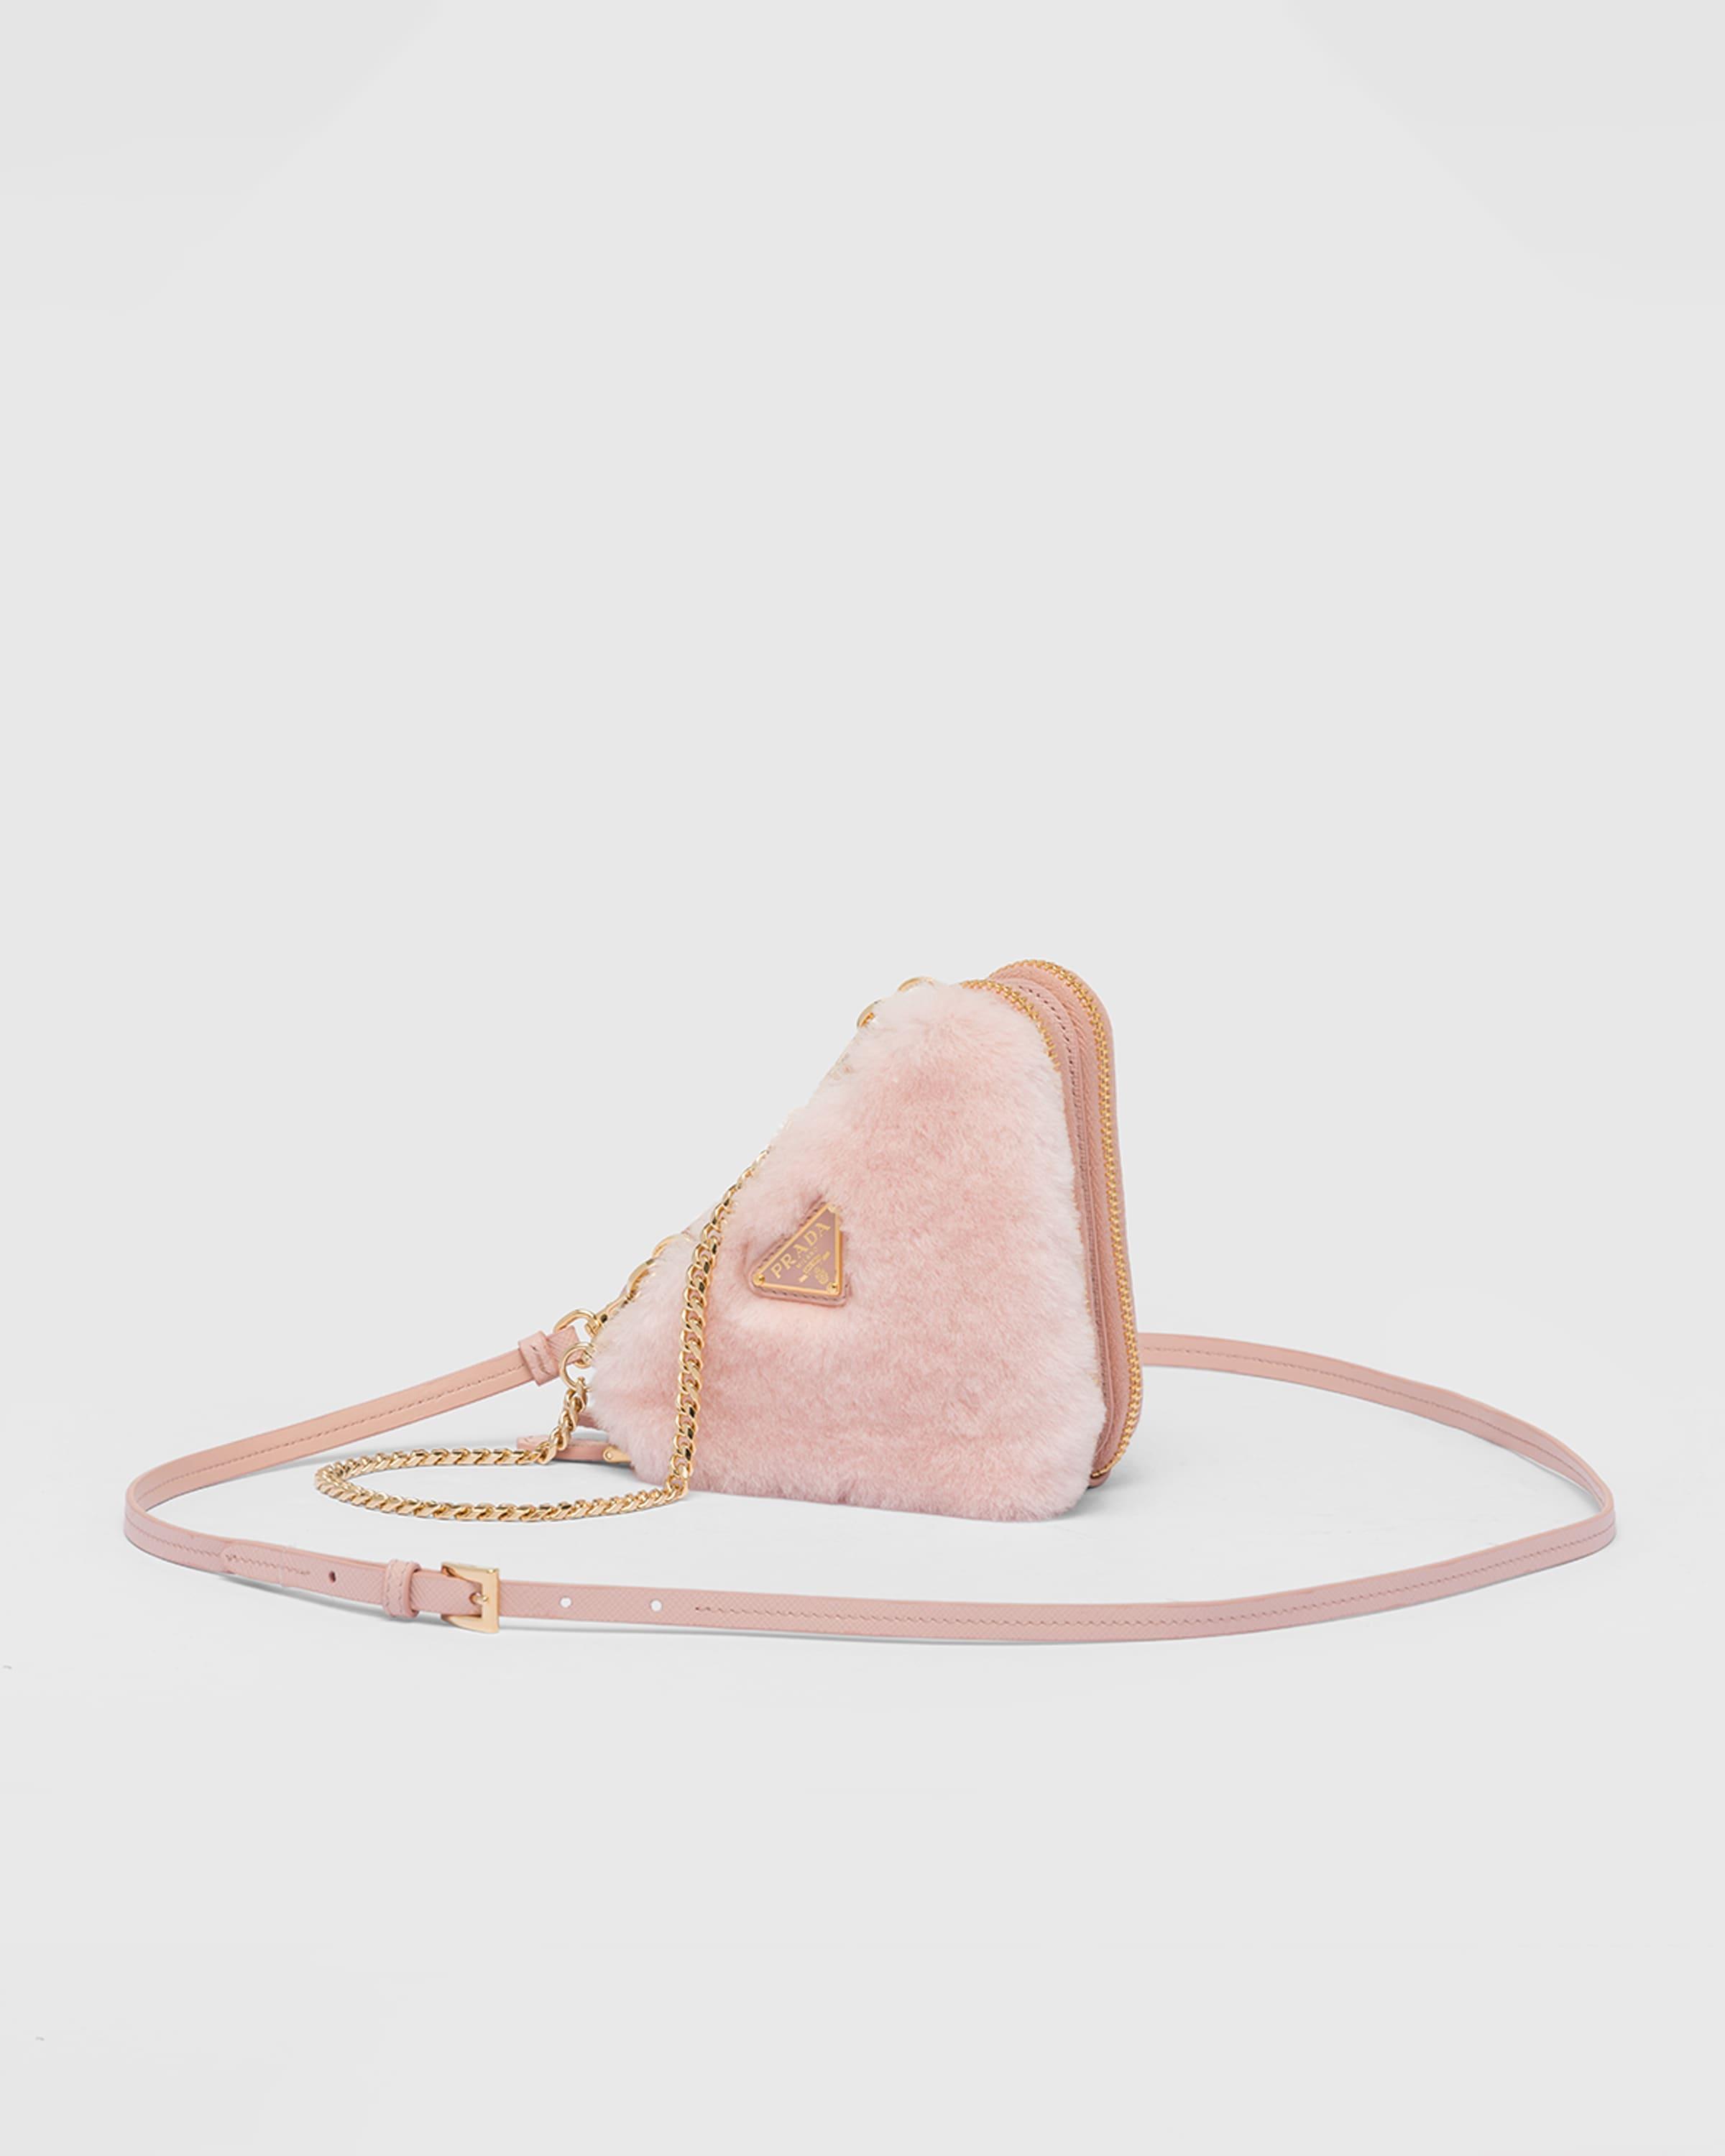 Prada Shearling And Saffiano Leather Mini-pouch in Pink | Lyst